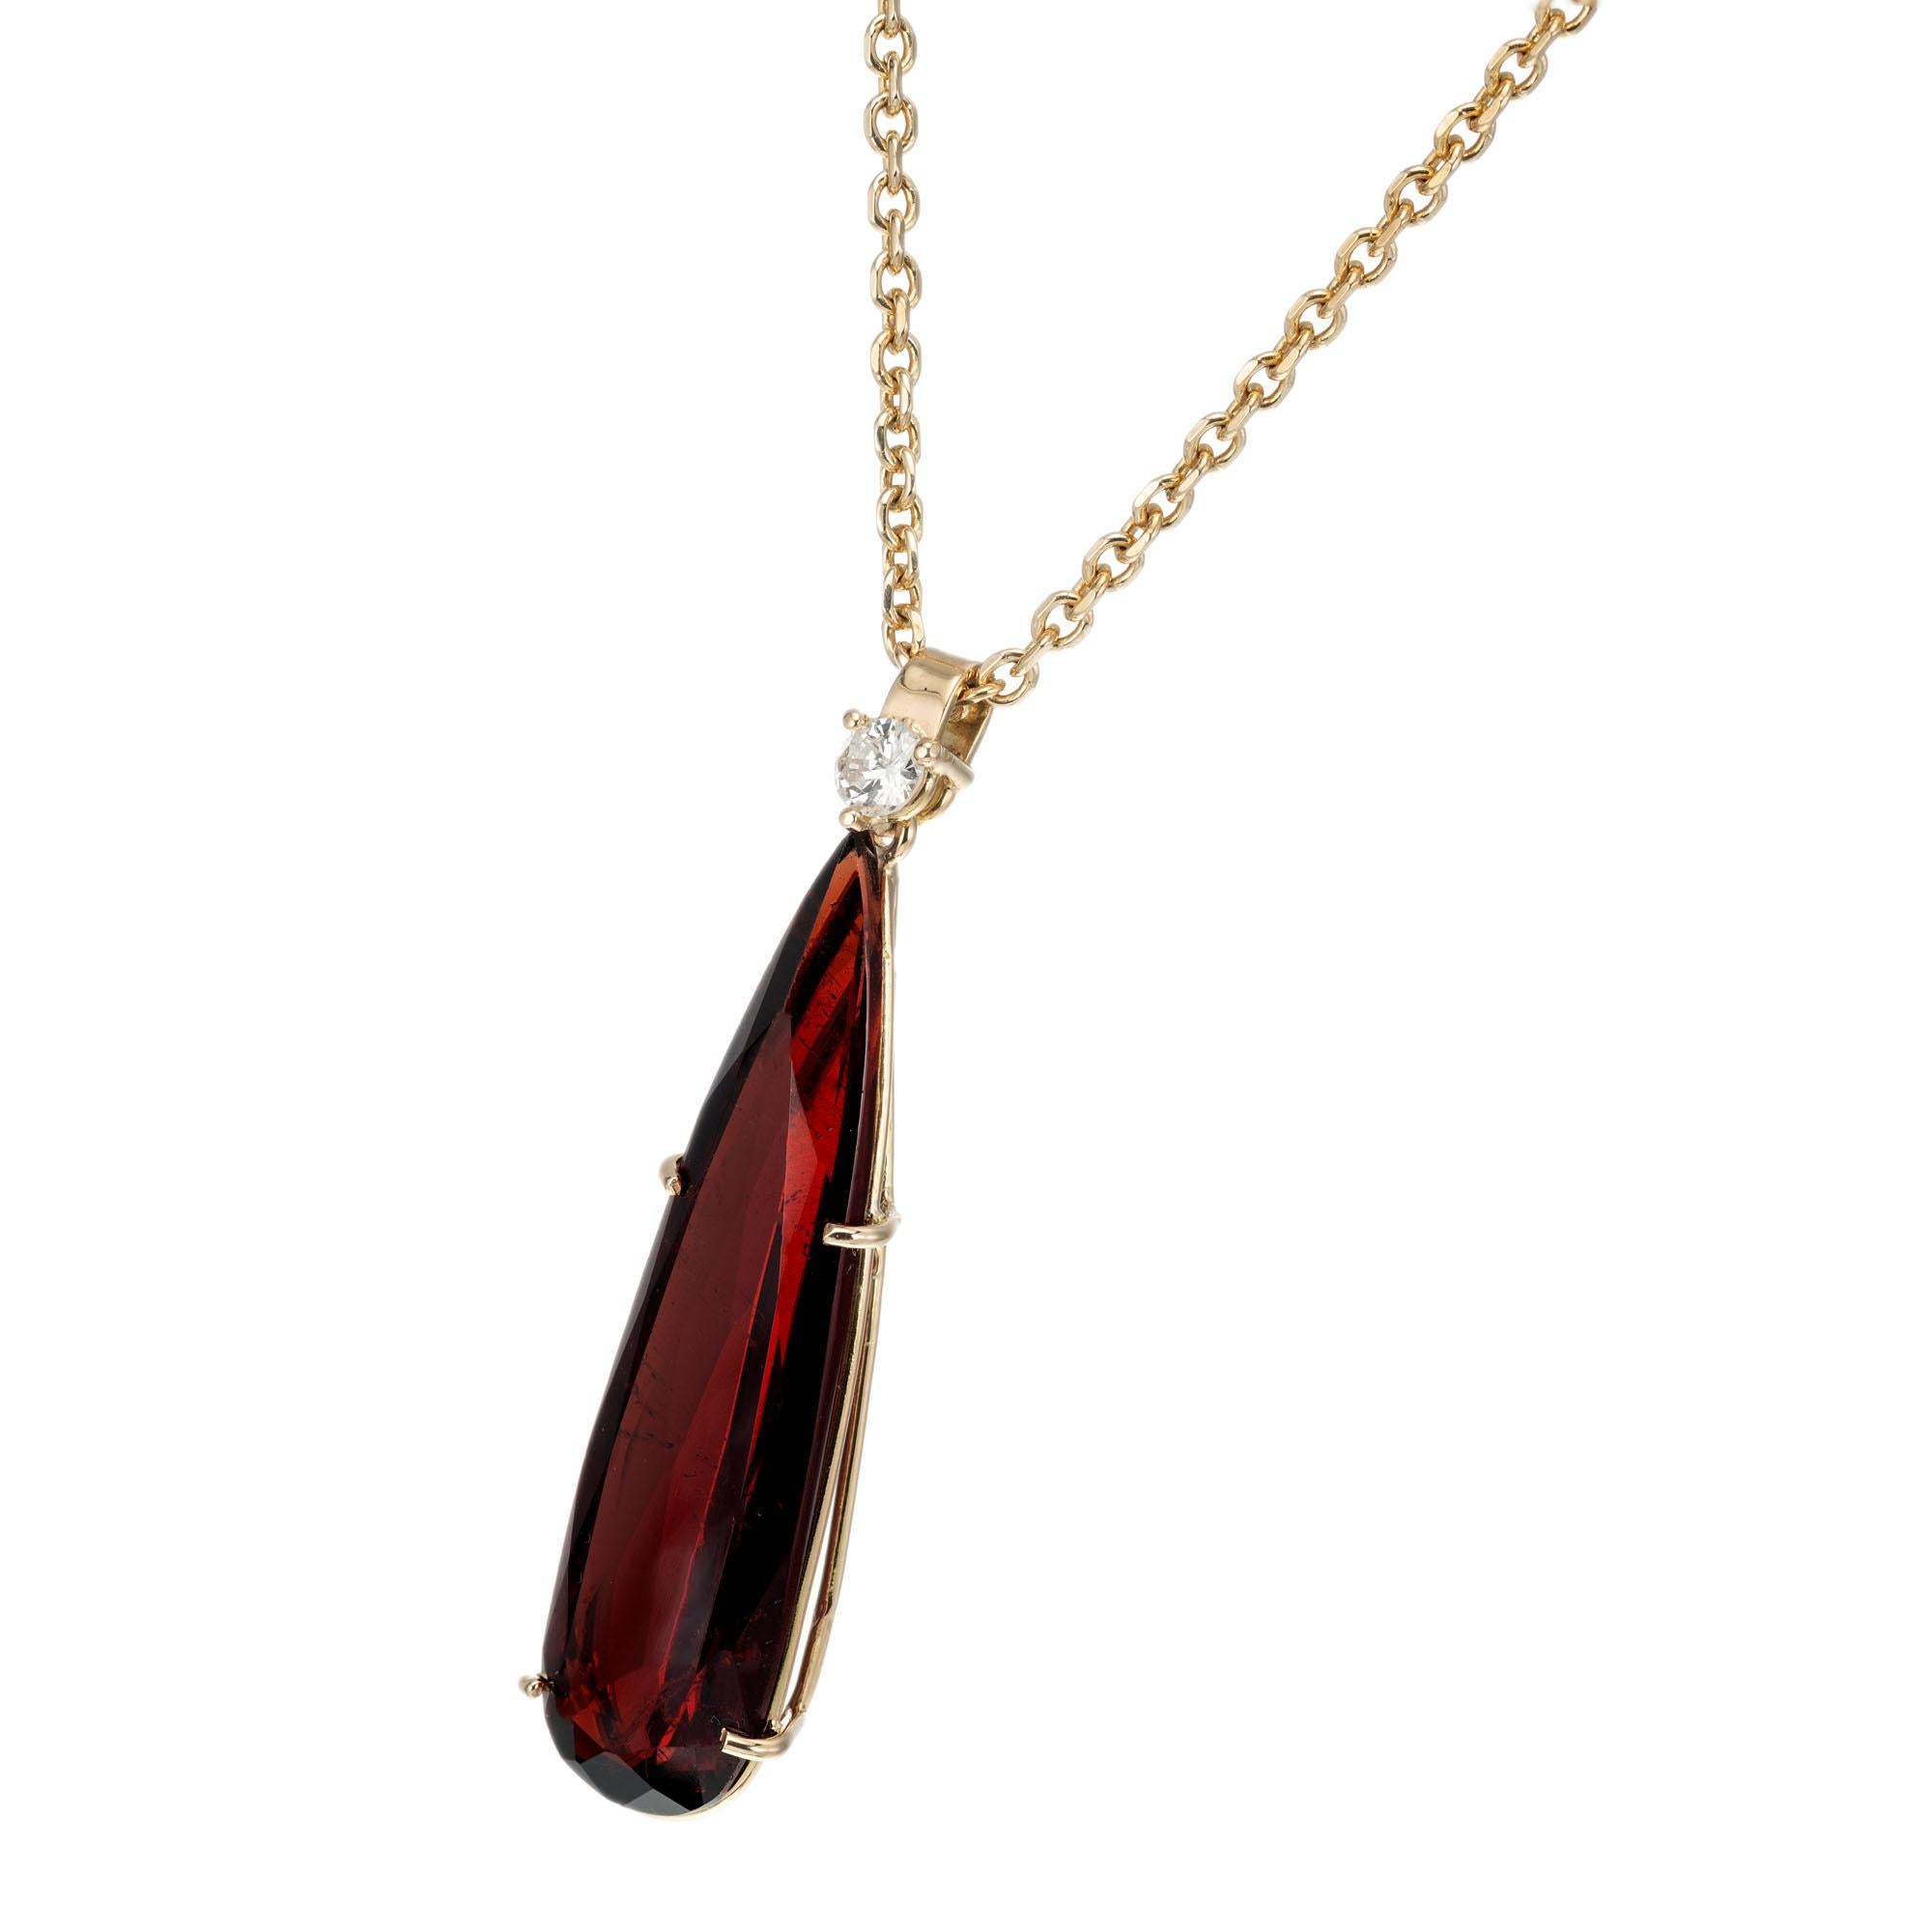 Brownish red pear shape garnet pendant with a round diamond accent in 14k yellow gold from the Peter Suchy Workshop. 16 Inch 14k yellow gold chain

1 pear shape brownish red garnet, approx. 14.93ct
1 round brilliant cut diamond G SI, approx.